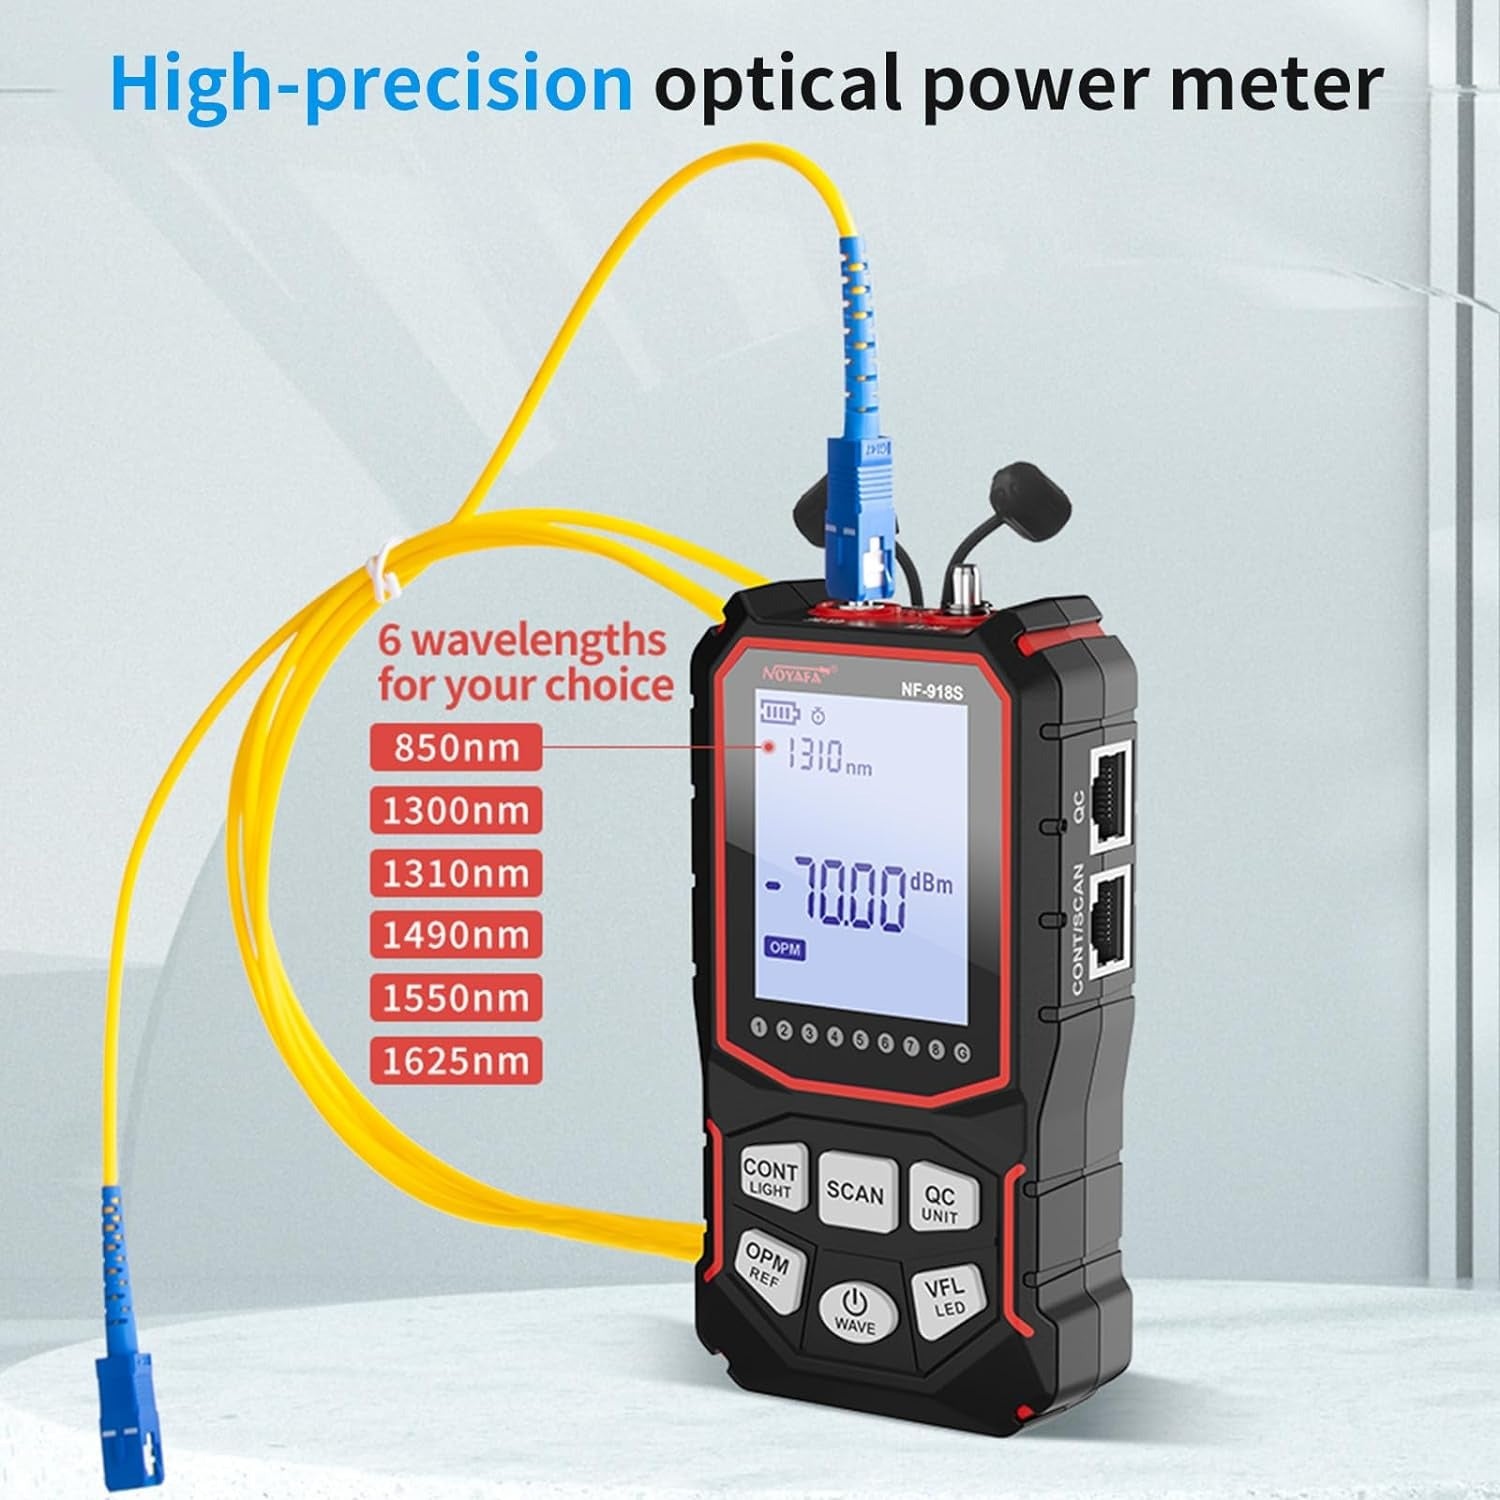 Noyafa NF-918S Network Cable Tester With 6 Wavelength Optical